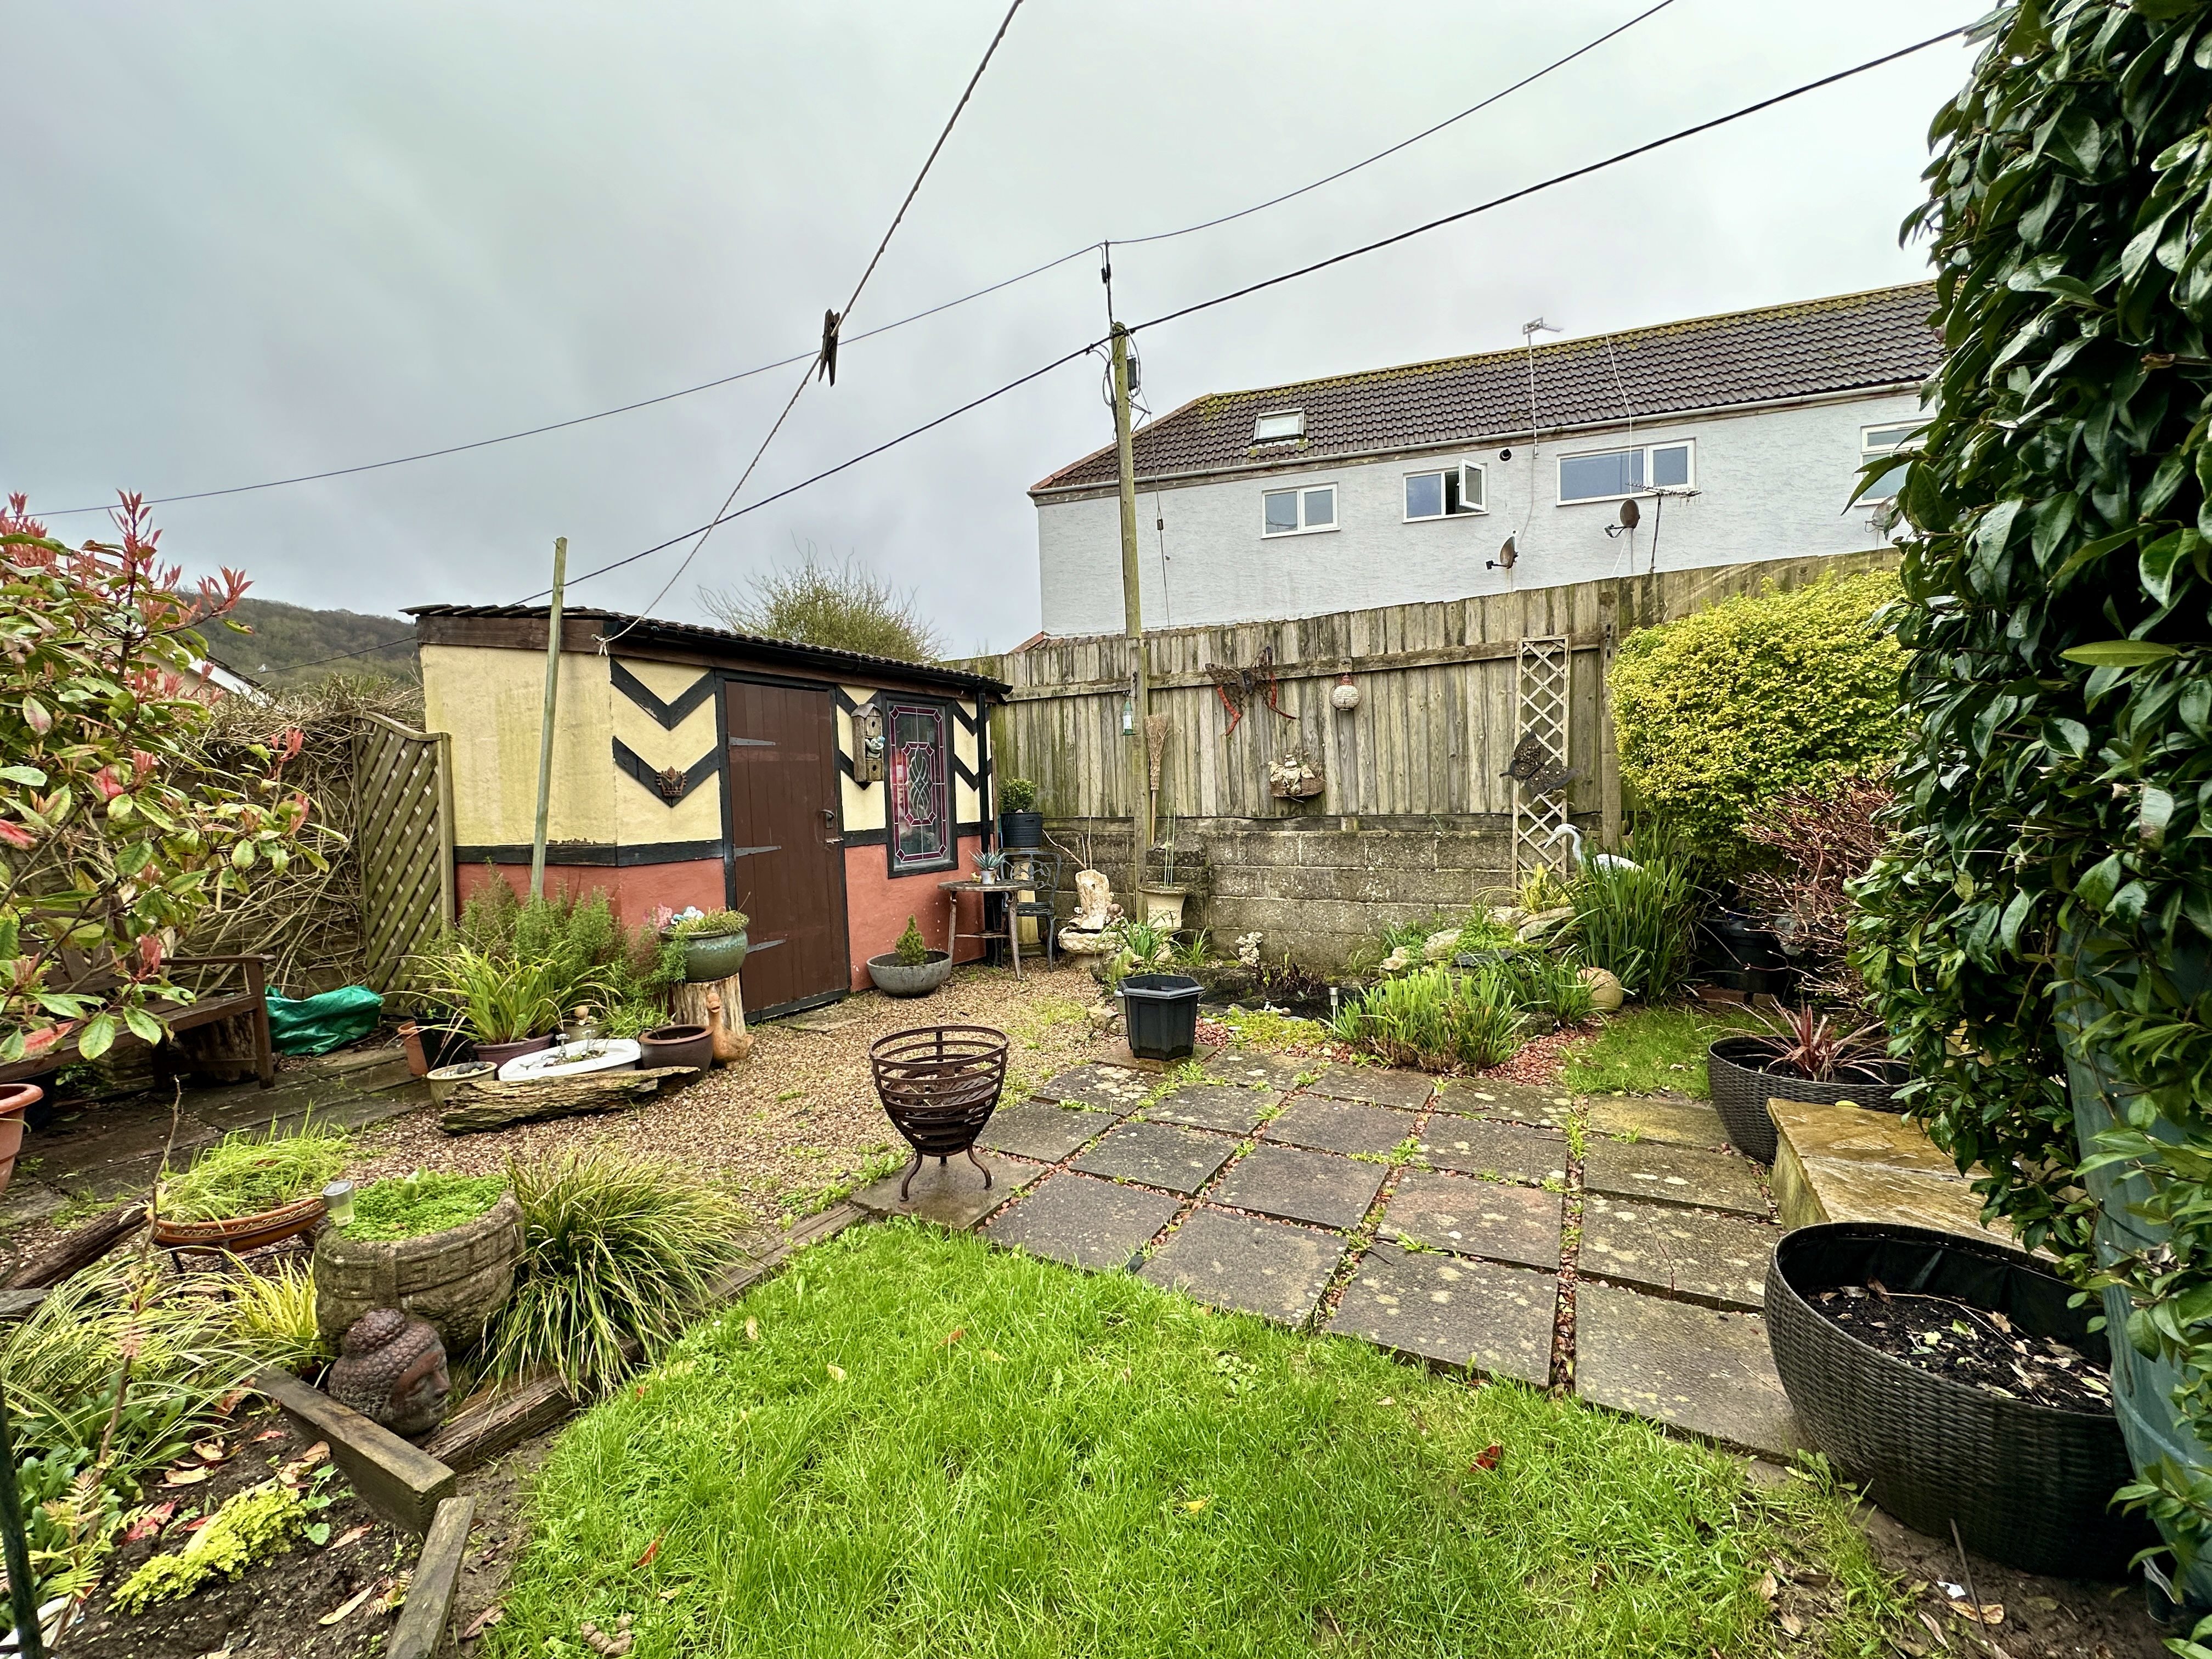 1 bed house / flat share to rent in Glan-y-mor, Crooks Lane  - Property Image 12